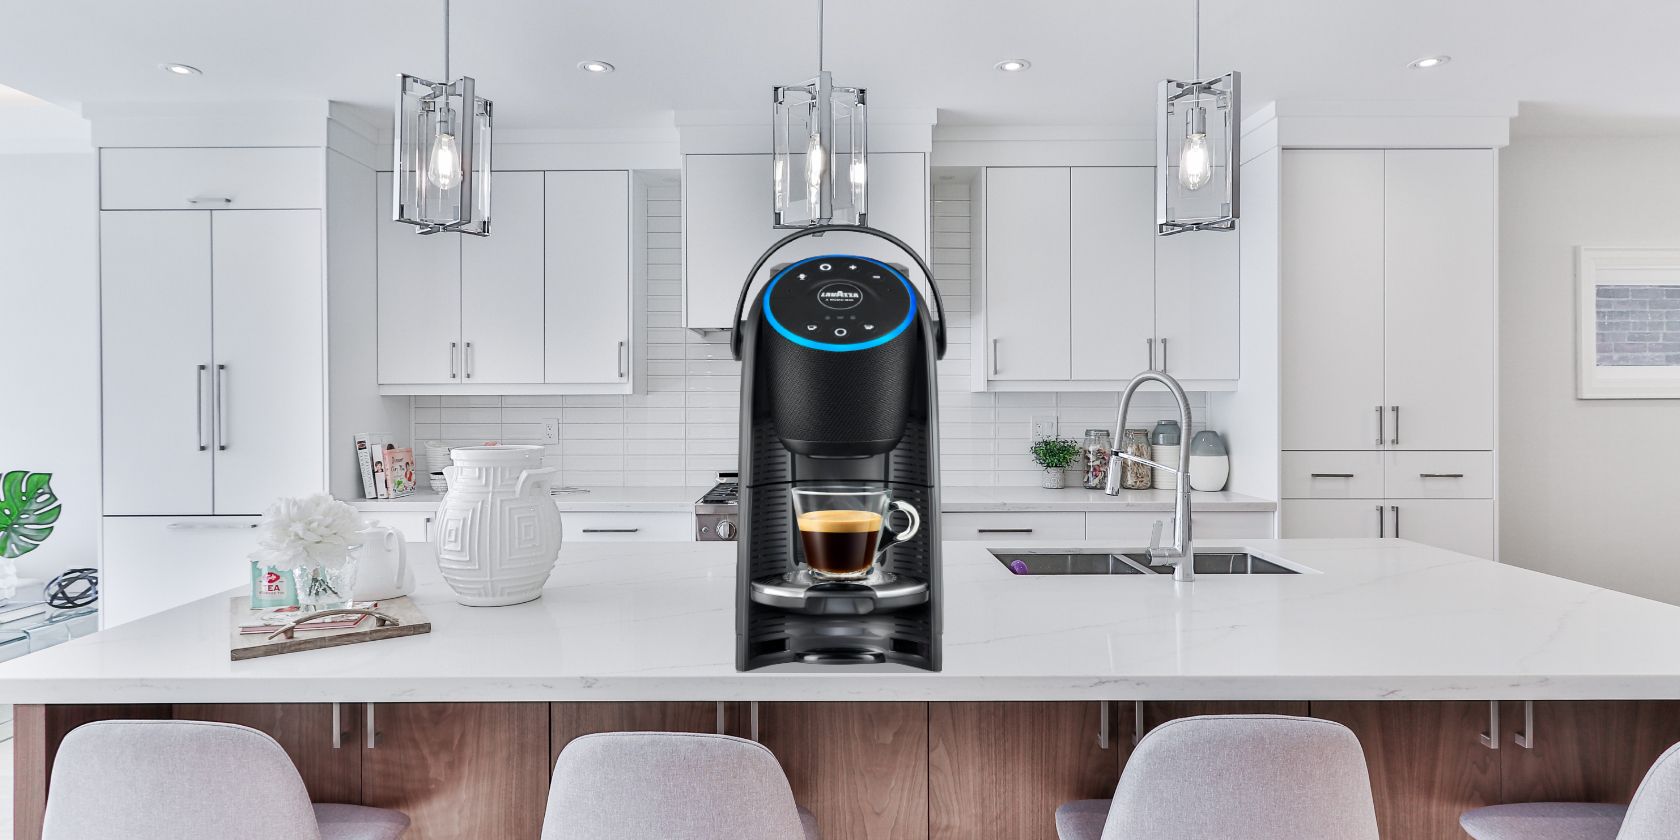 DEAL OF THE DAY: Save over £100 off the Lavazza Voicy machine that's got a  built-in Alexa